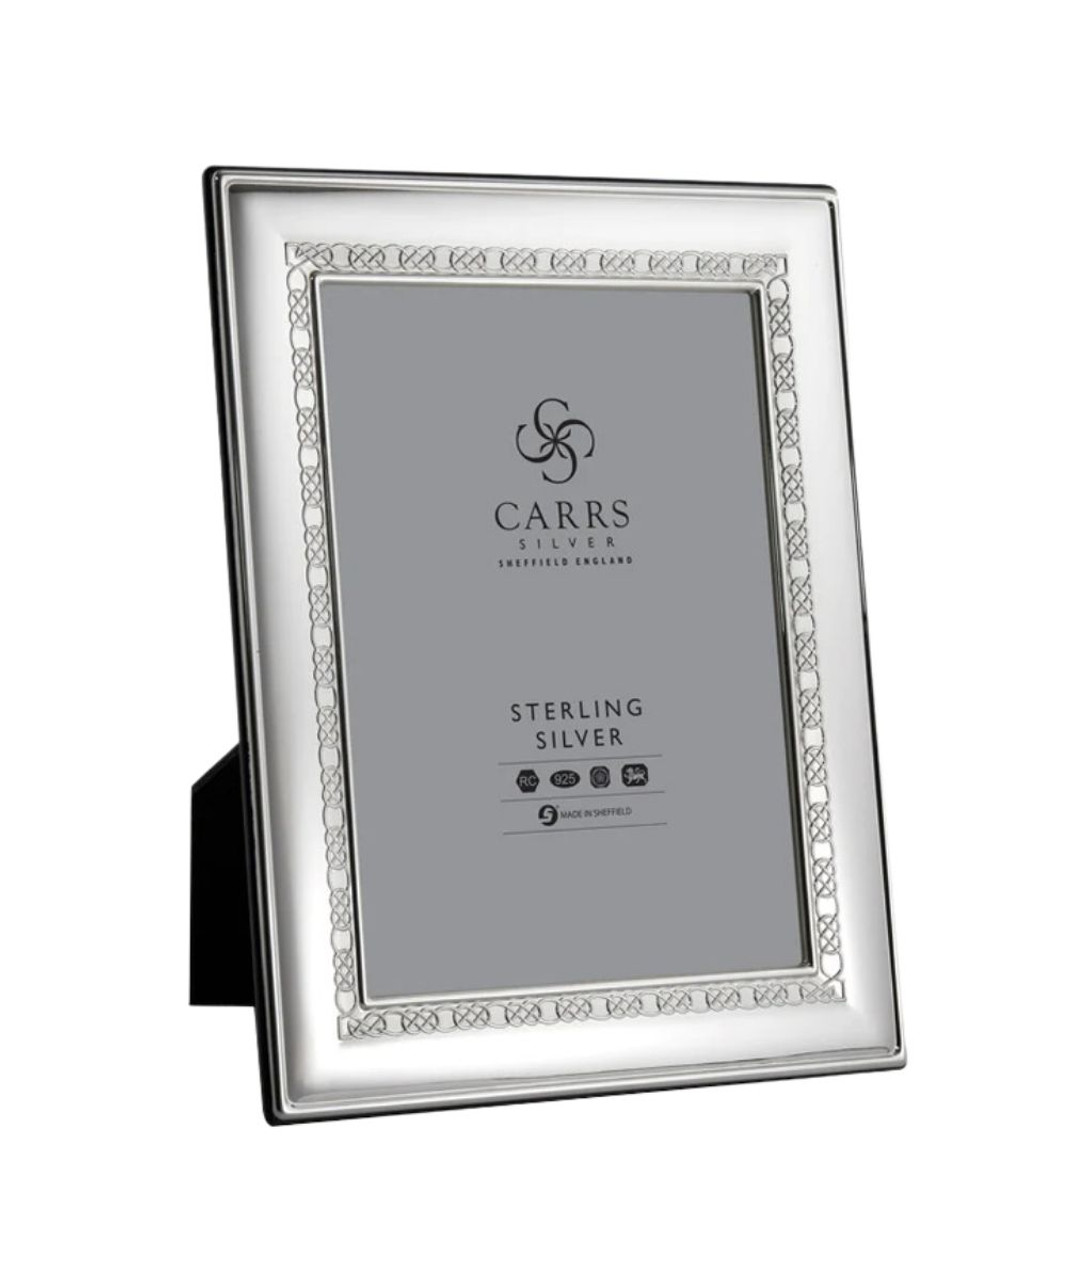 https://cdn11.bigcommerce.com/s-qv8xcg1pwn/images/stencil/1280x1280/products/965/25294/Carrs_Silver_Celtic_Sterling_Silver_Frame__77412.1680305119.jpg?c=1